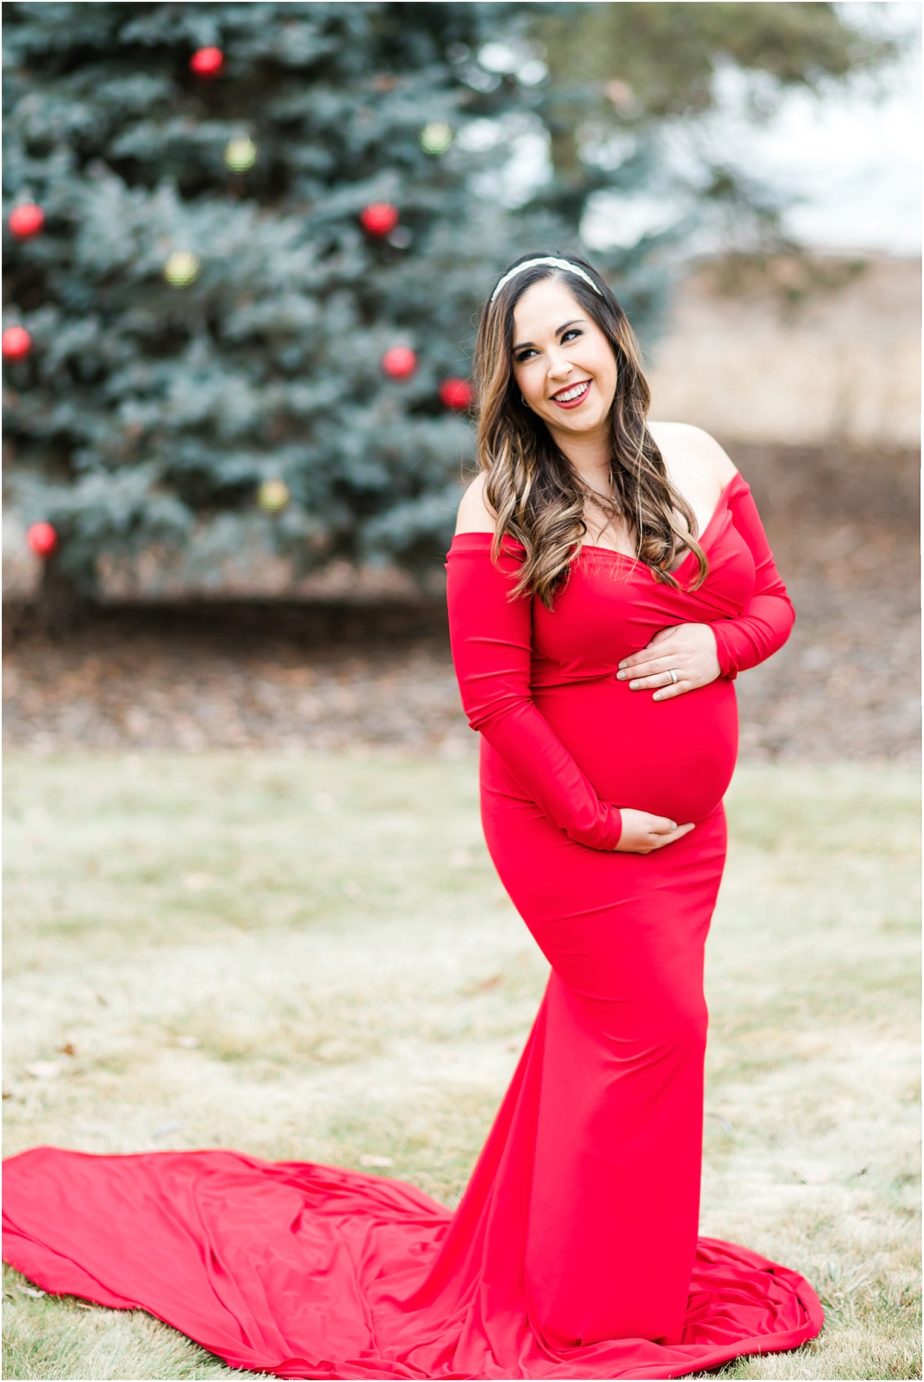 Maries maternity session prenant woman in long red dressMaries maternity session prenant woman in long red dressMaries maternity session prenant woman in long red dress